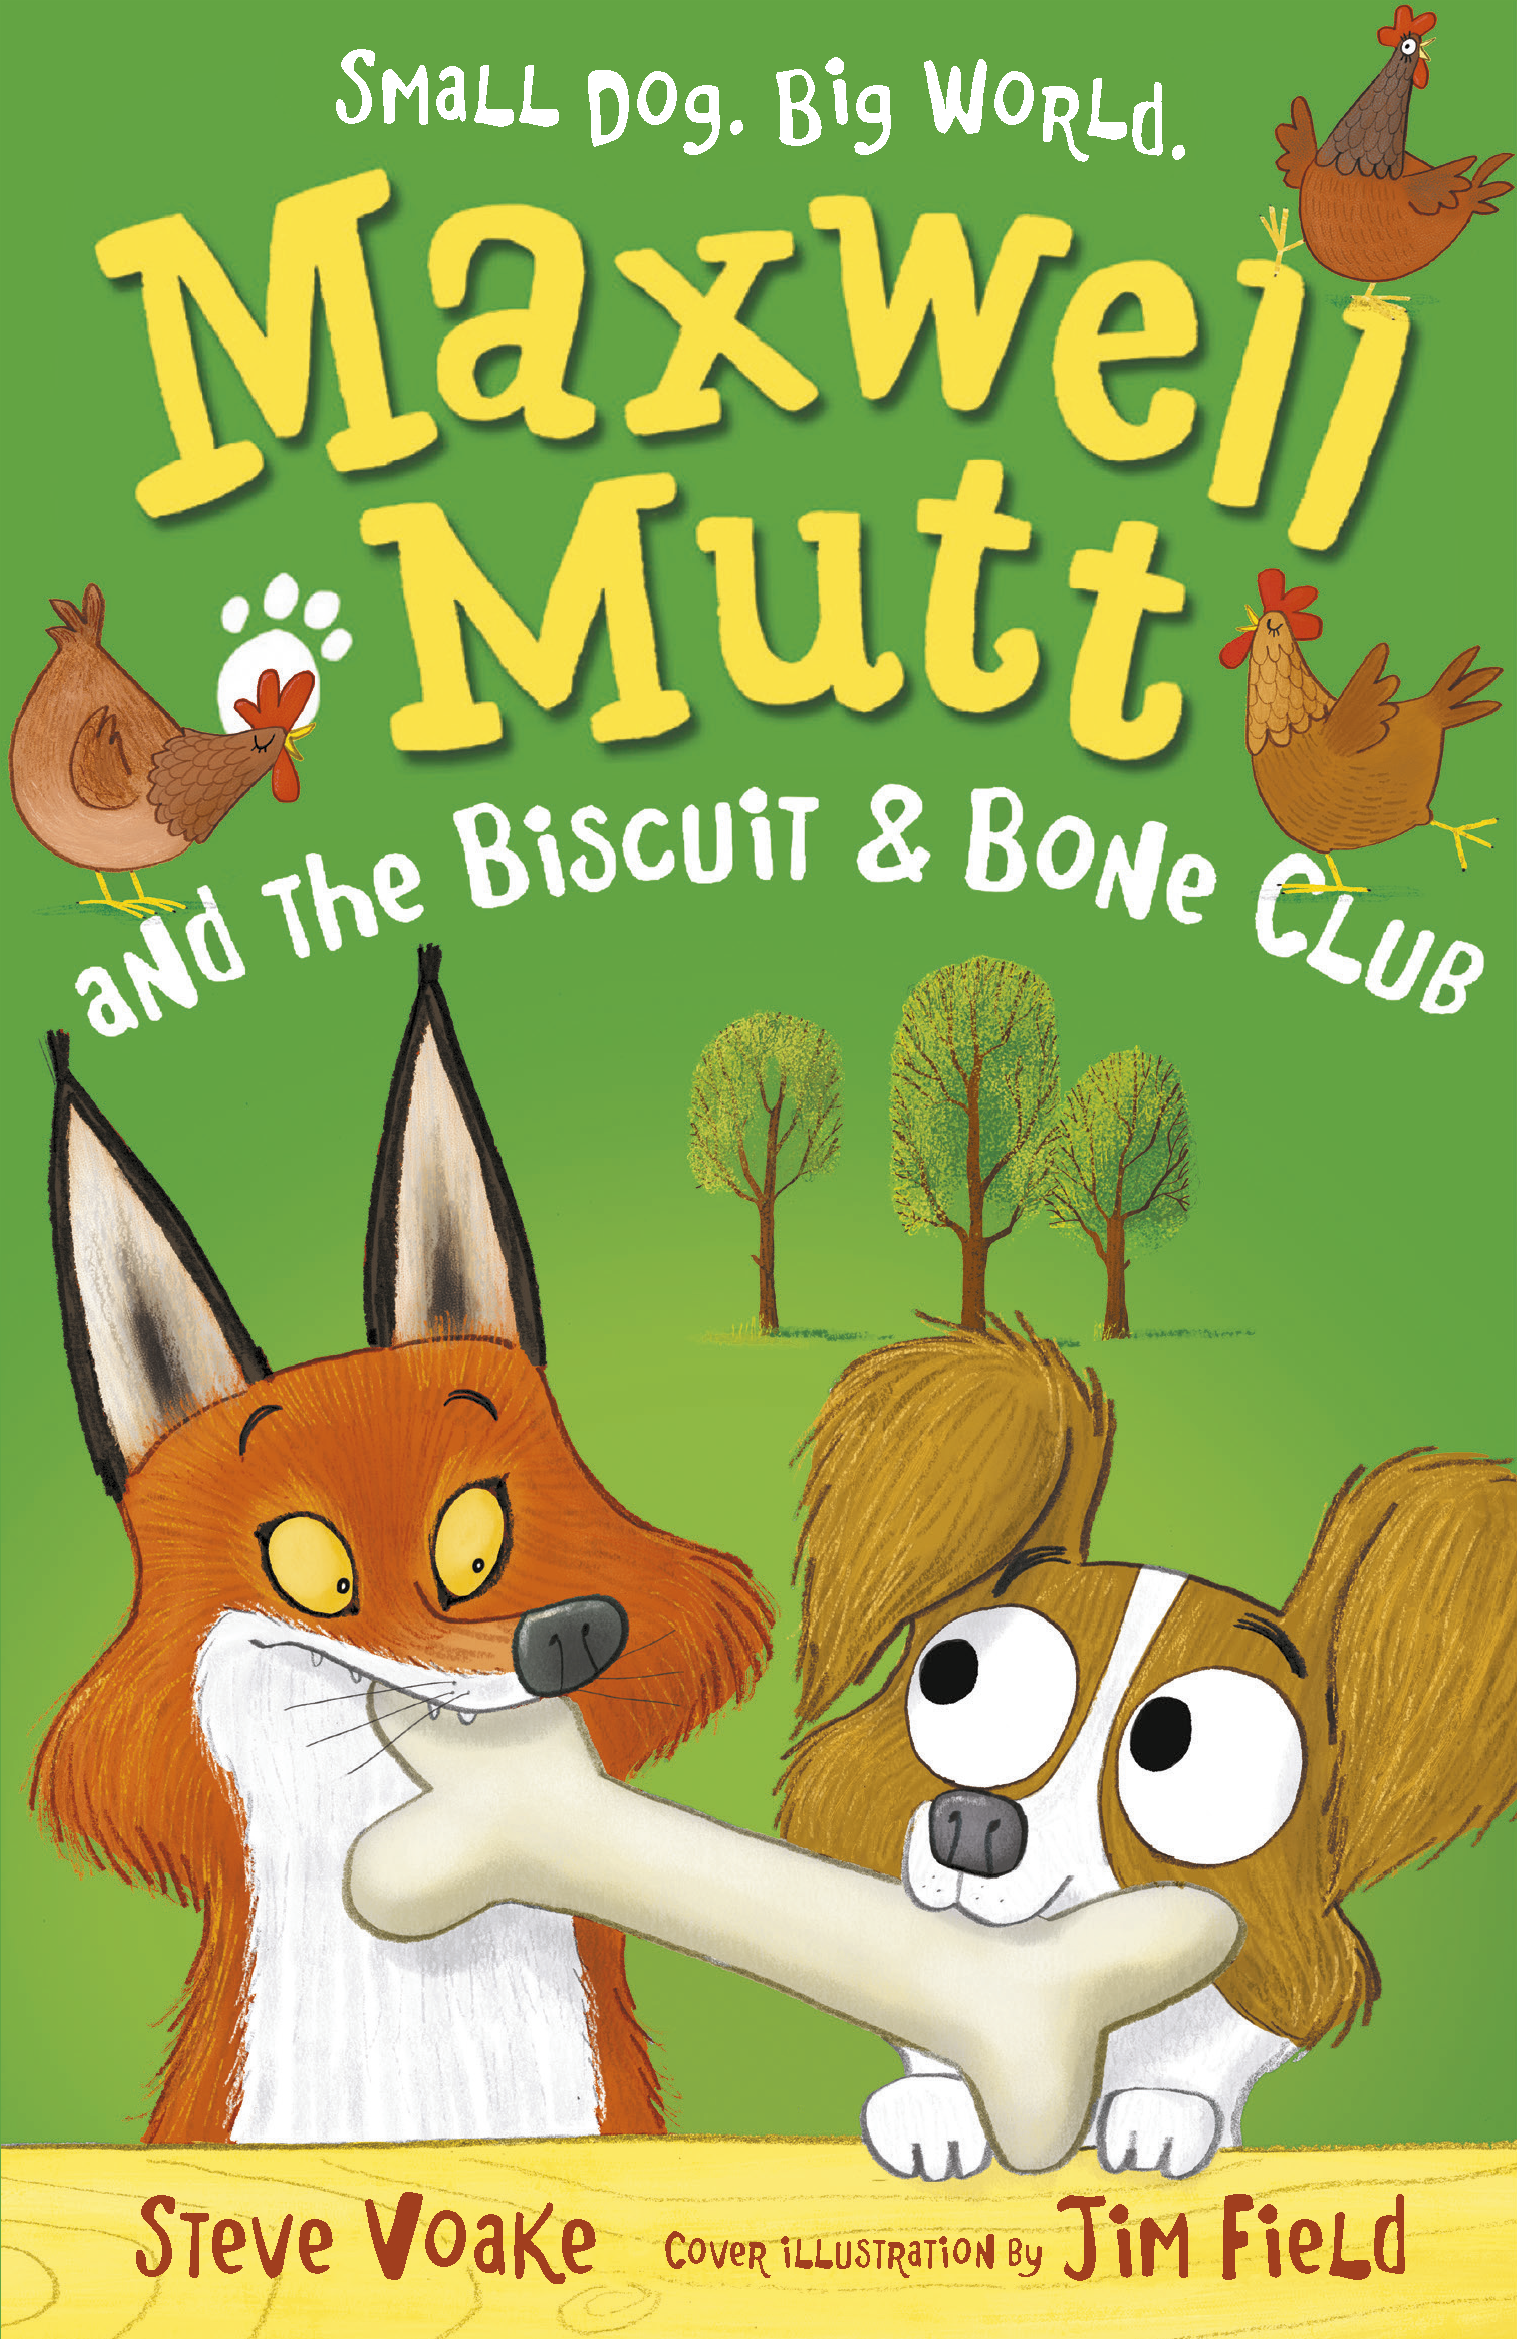 Maxwell-Mutt-and-the-Biscuit-Bone-Club